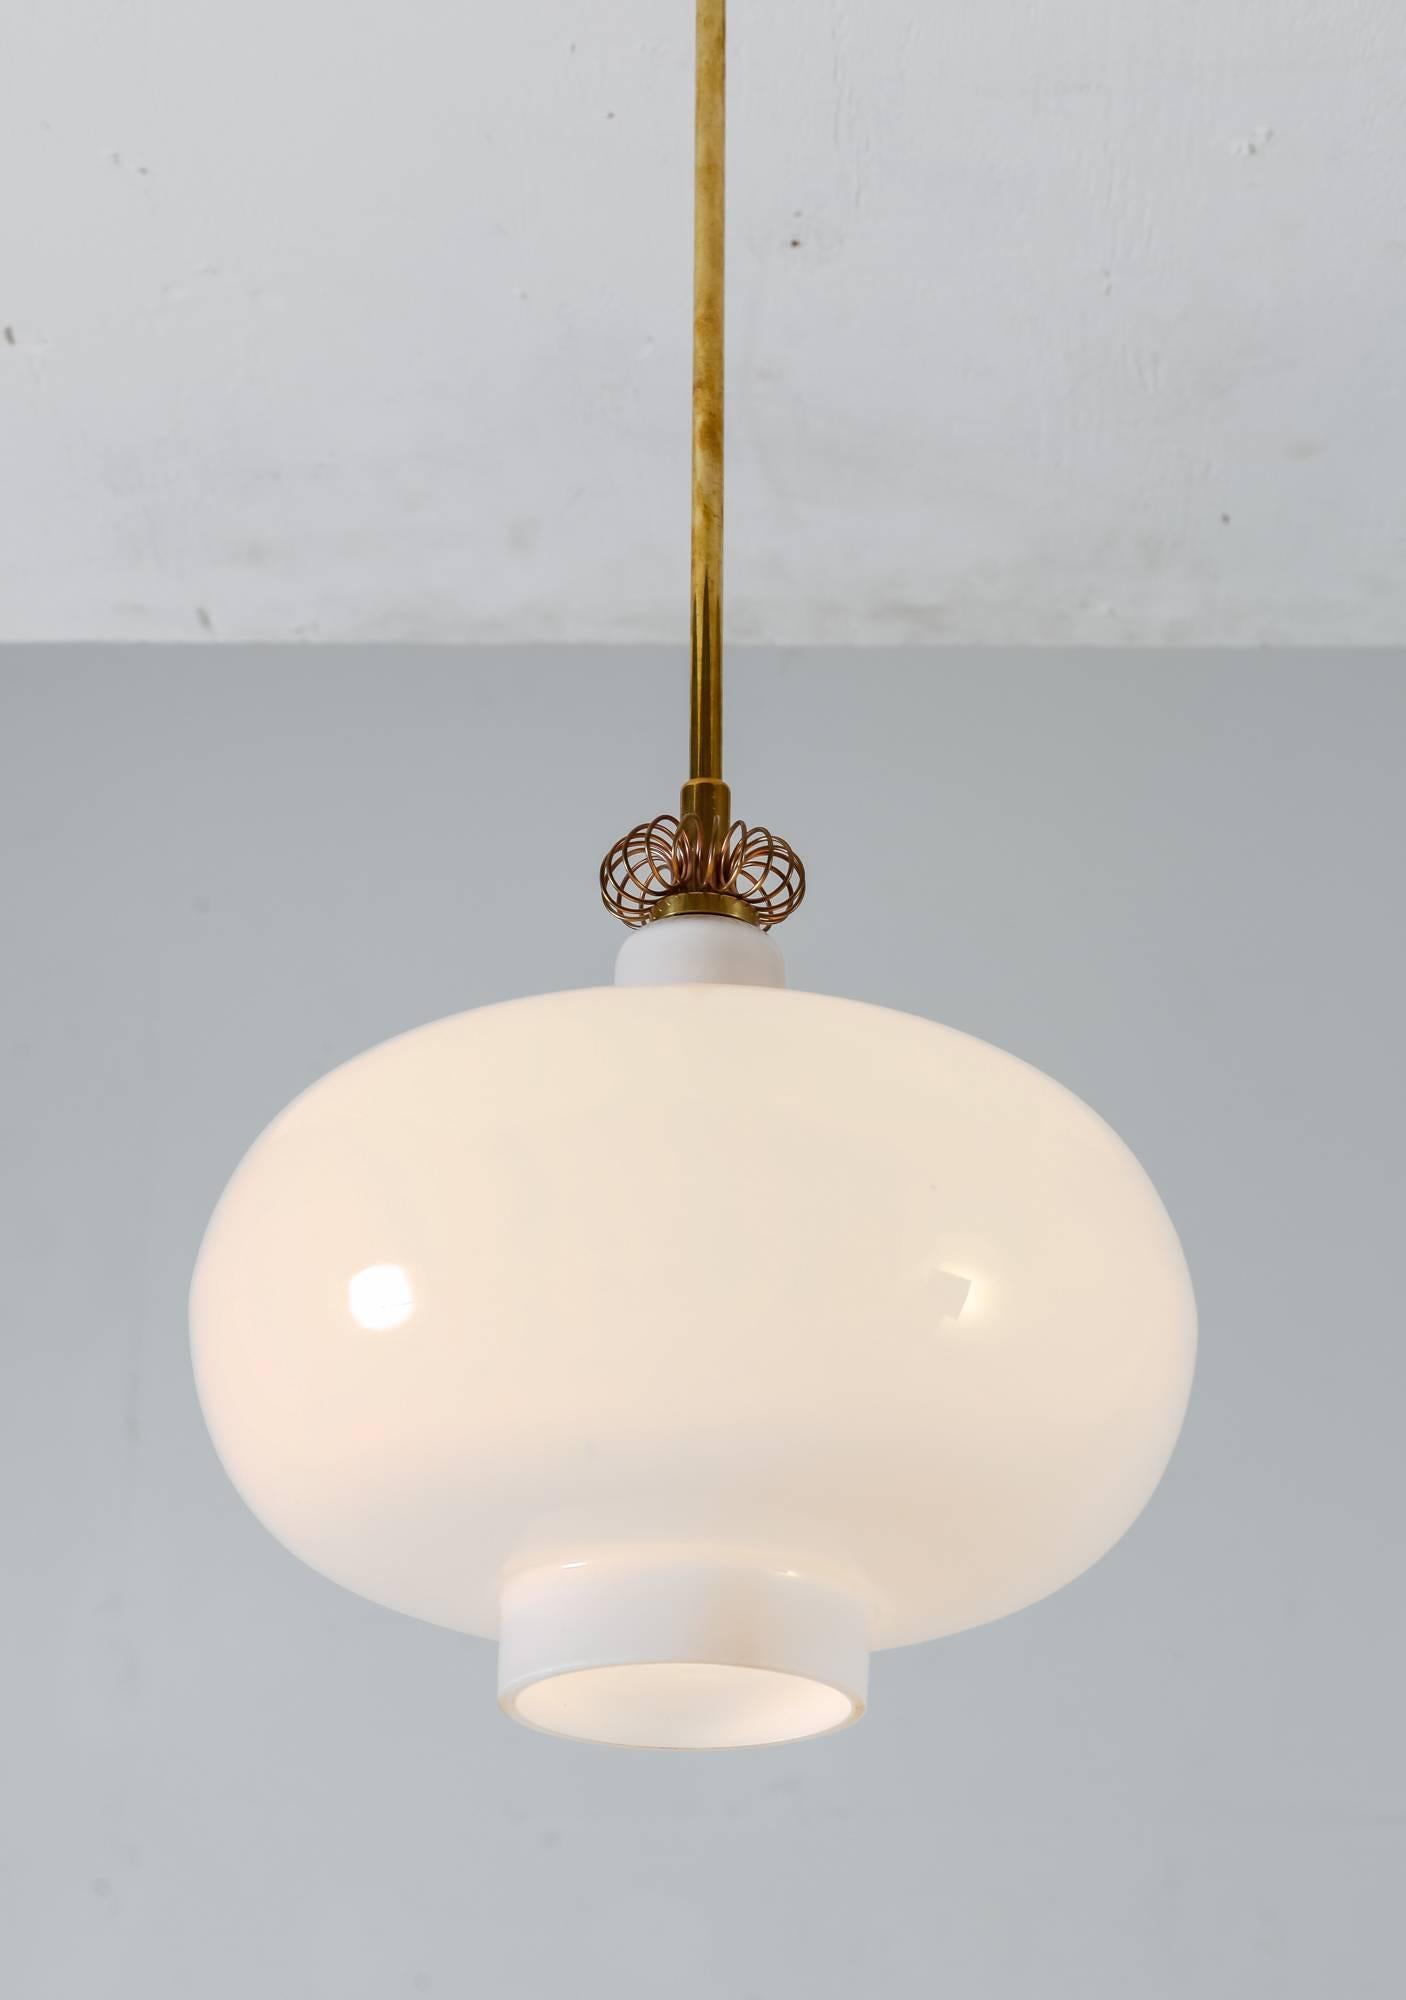 A very rare Paavo Tynell model 'K2-19' pendant for Idman, Finland. The lamp is made of a bell-shaped opaline glass shade with a brass celing stem and decoration.
